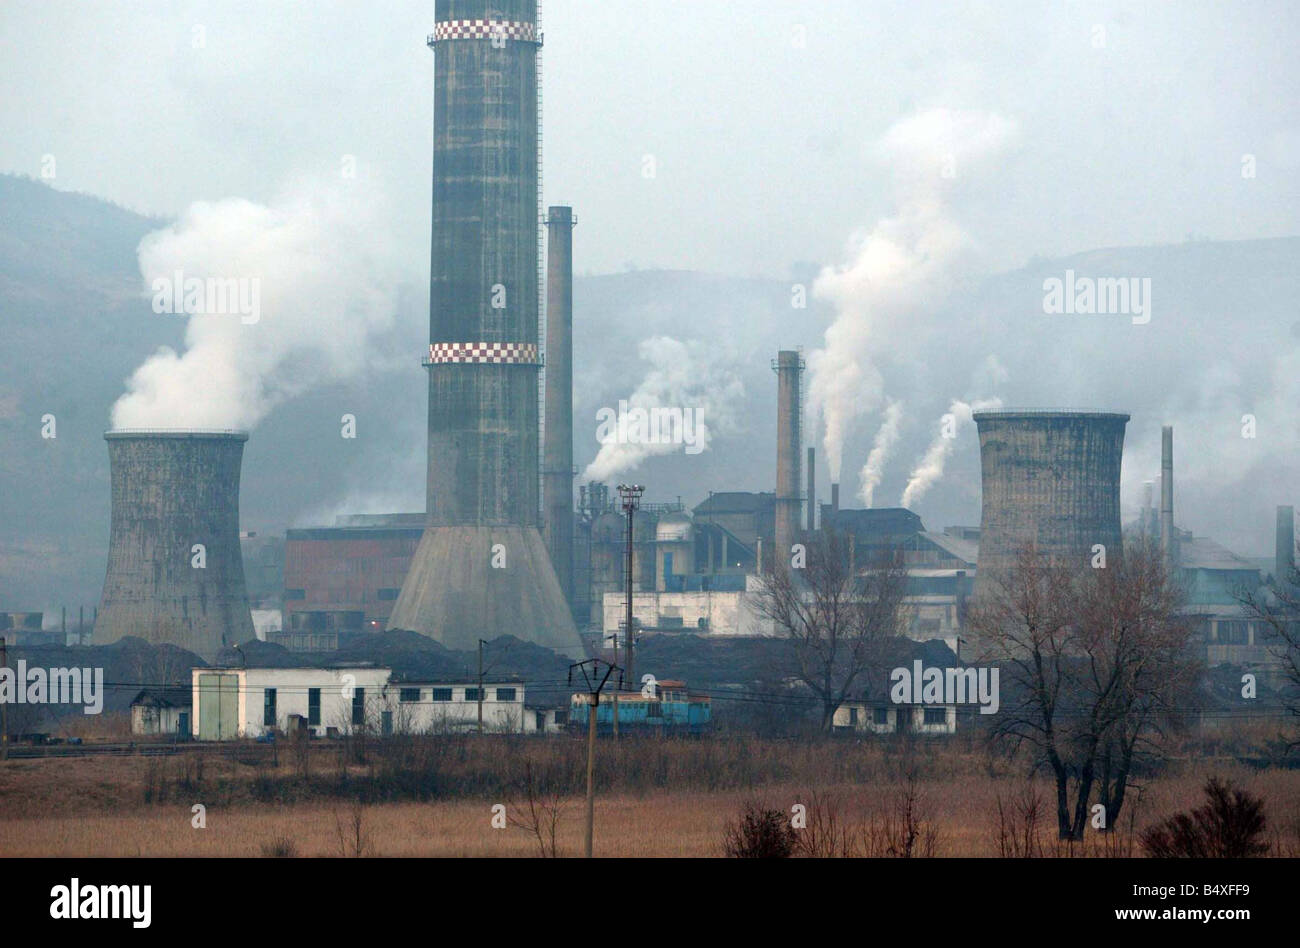 Copsa Mica Romania November 2006 Copsa Mica Europe s most polluted place the Sometra smelting works Stock Photo